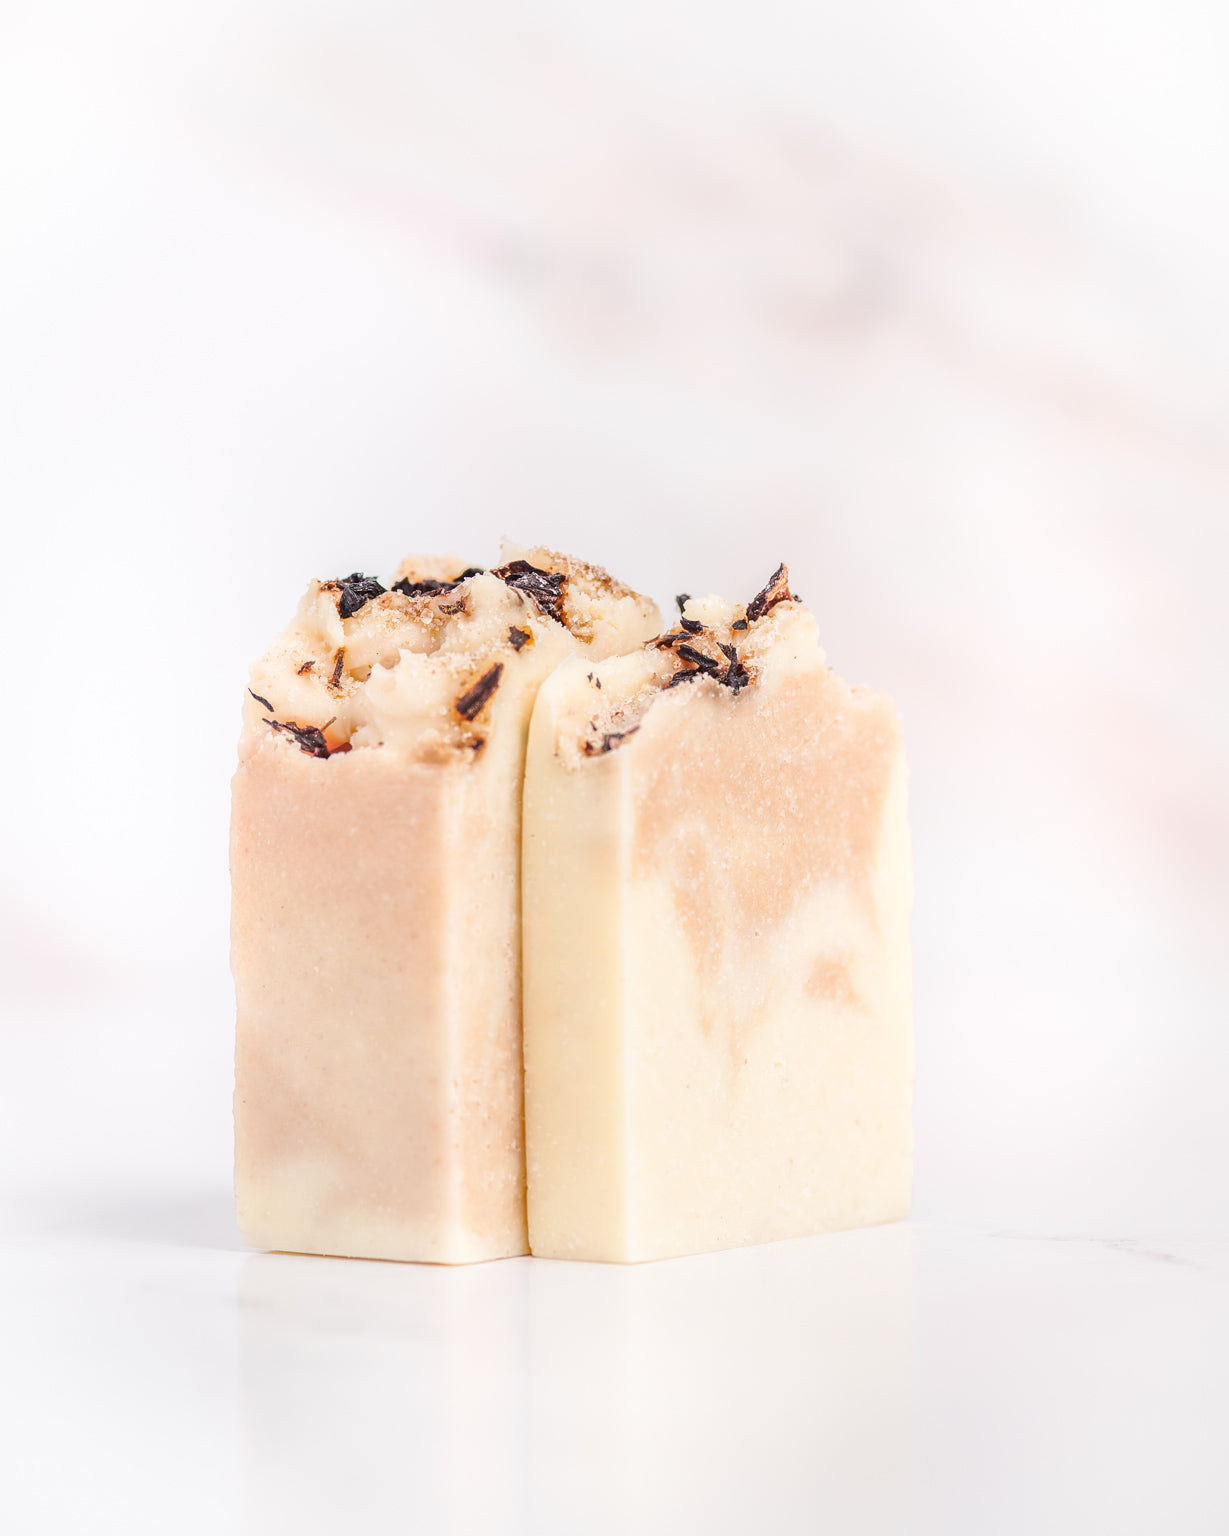 Himalayan Salt & Coconut Milk Soap, scented with Ho wood, Lavender and Marjoram